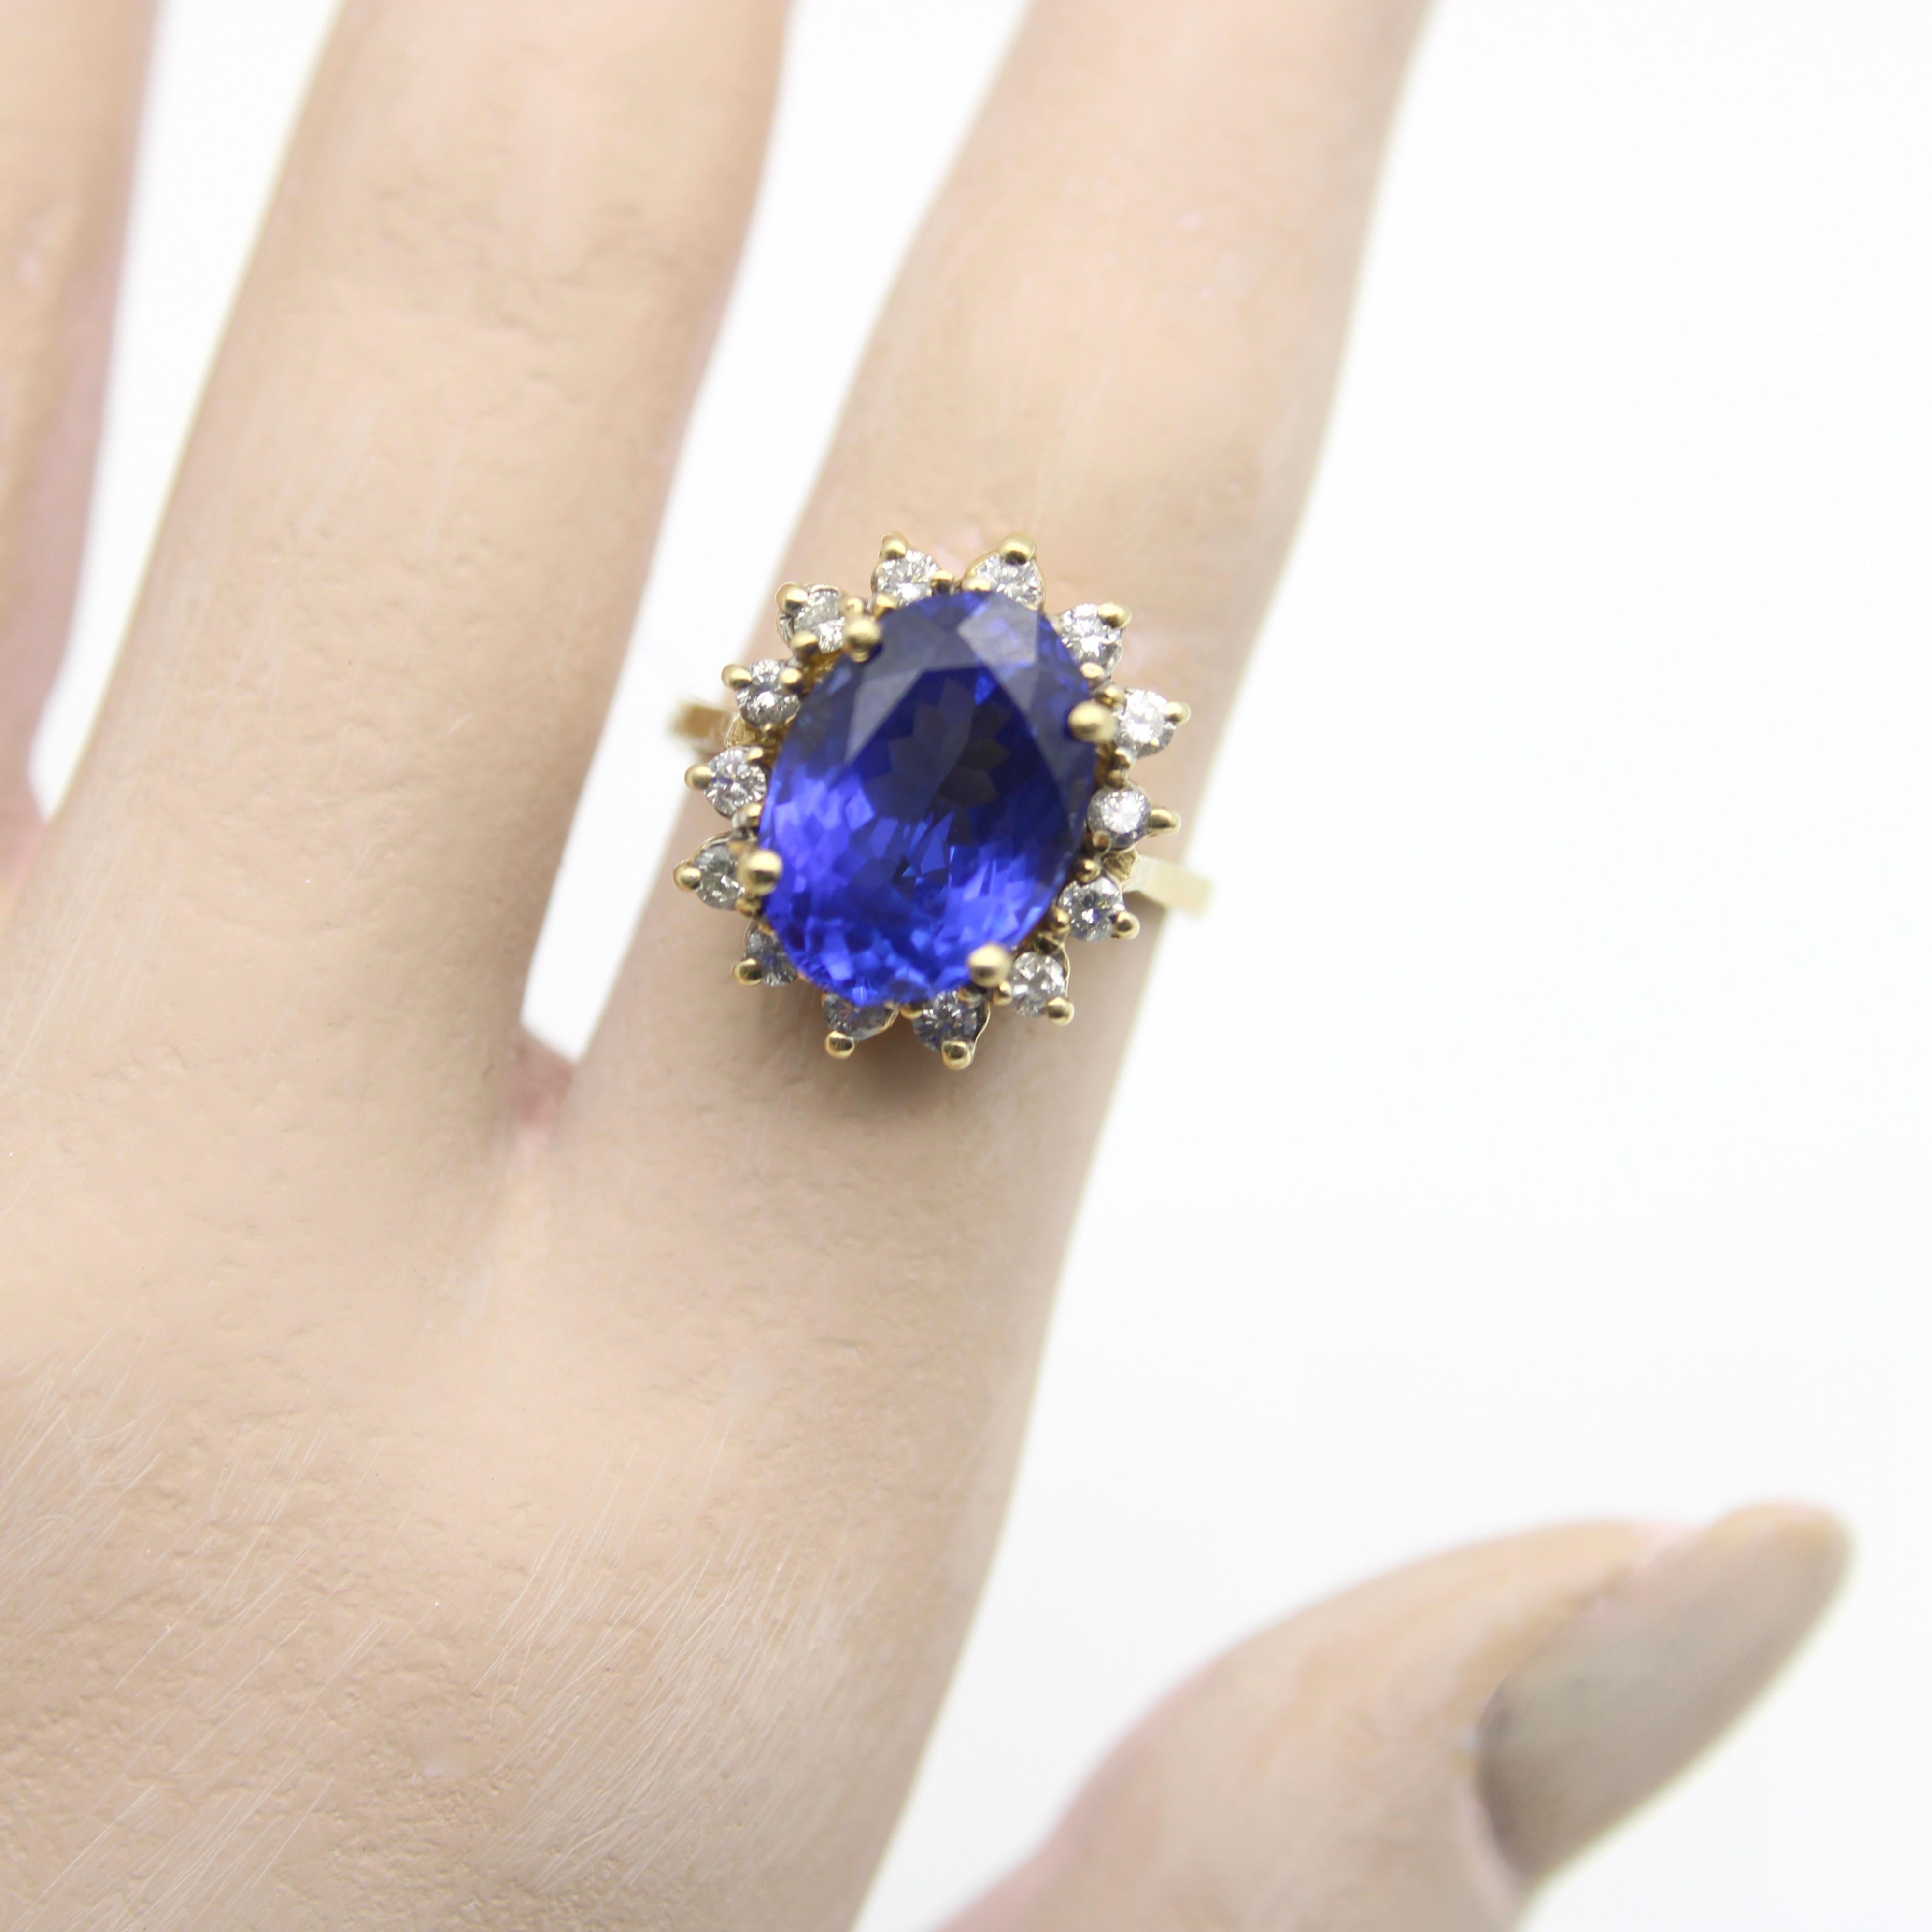 Contemporary Vintage 14K Gold 7 Carat Tanzanite and Diamond Halo Ring by LeVian For Sale